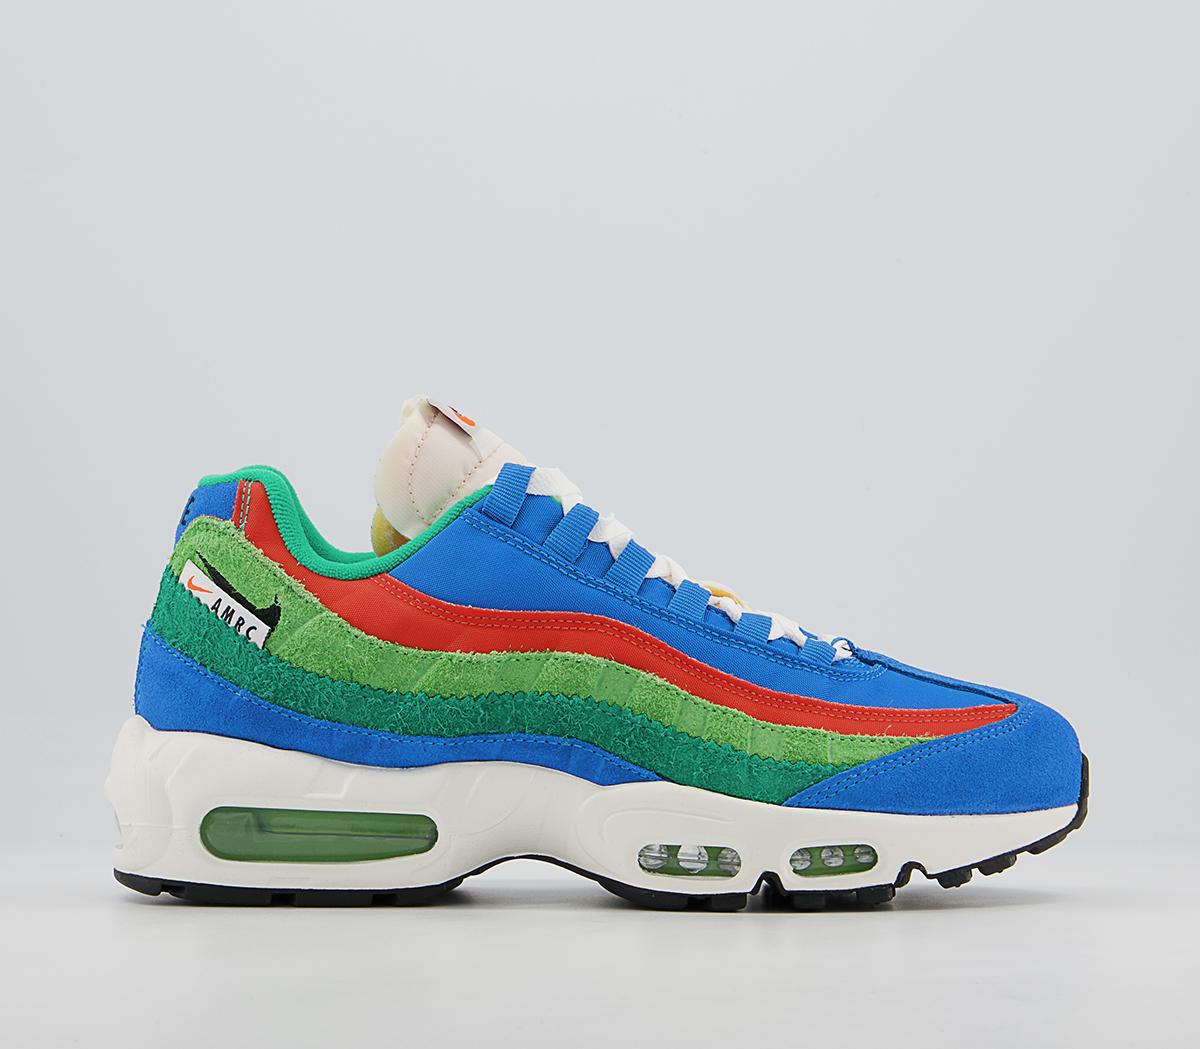 Nike Air Max 95 Trainers Light Photo 